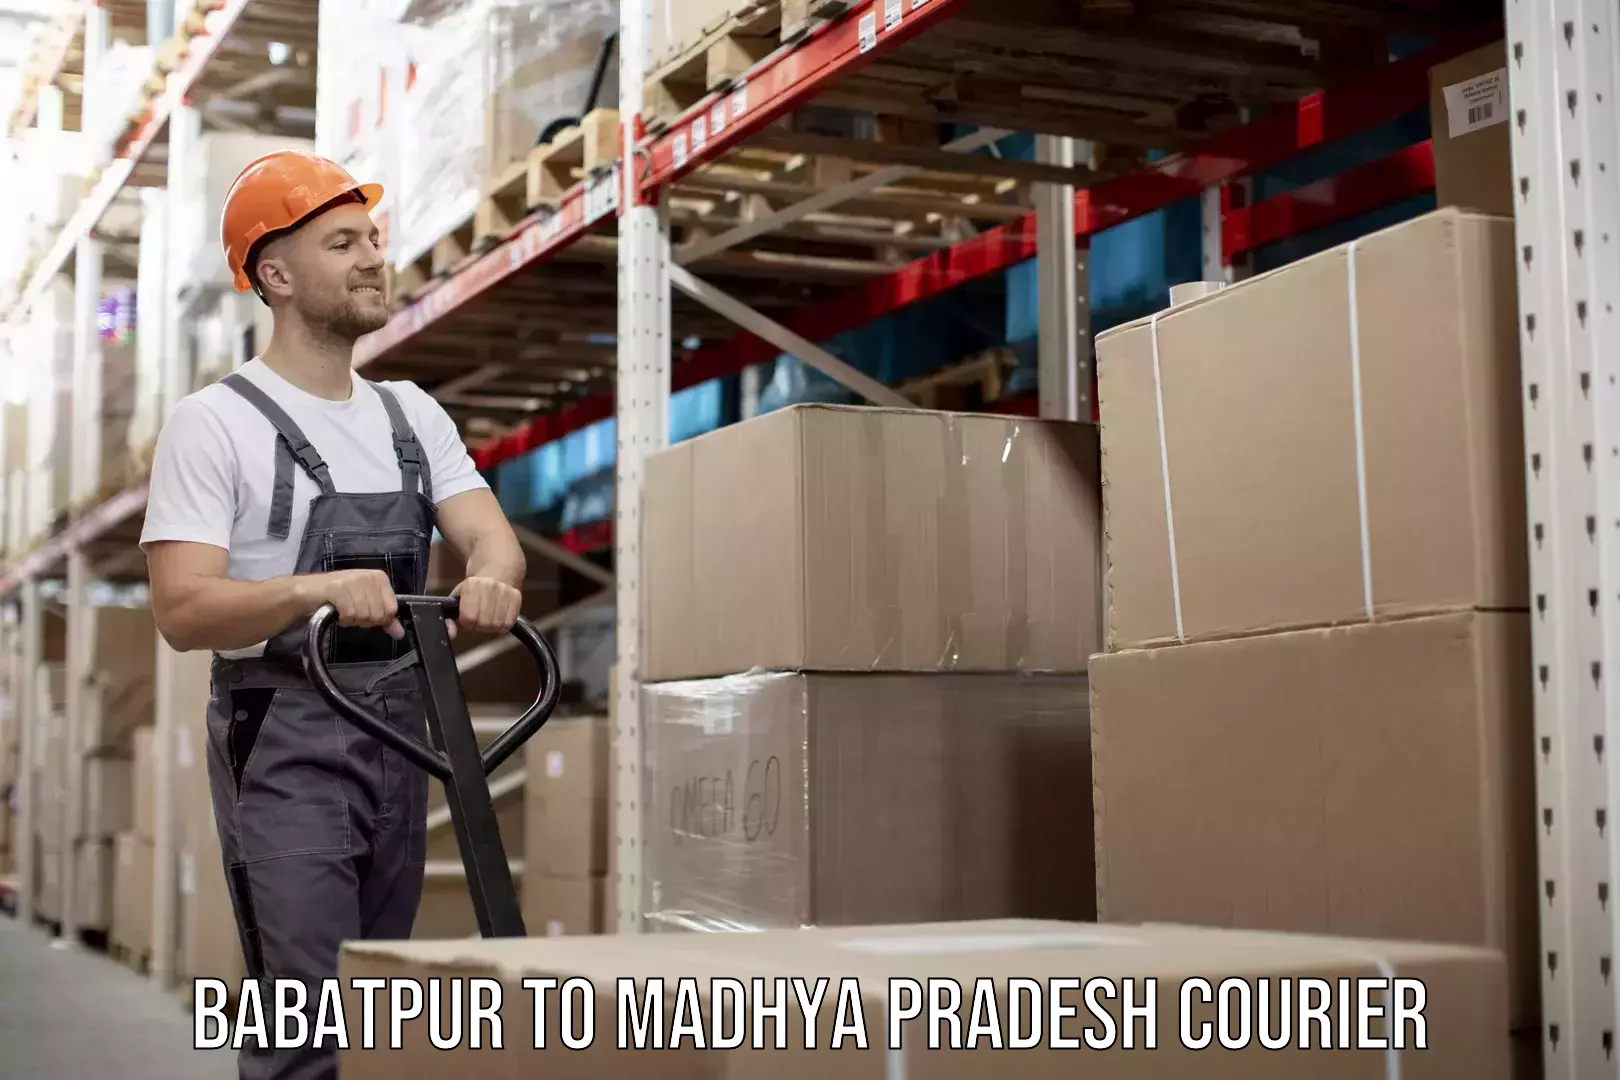 Reliable delivery network Babatpur to Madhya Pradesh